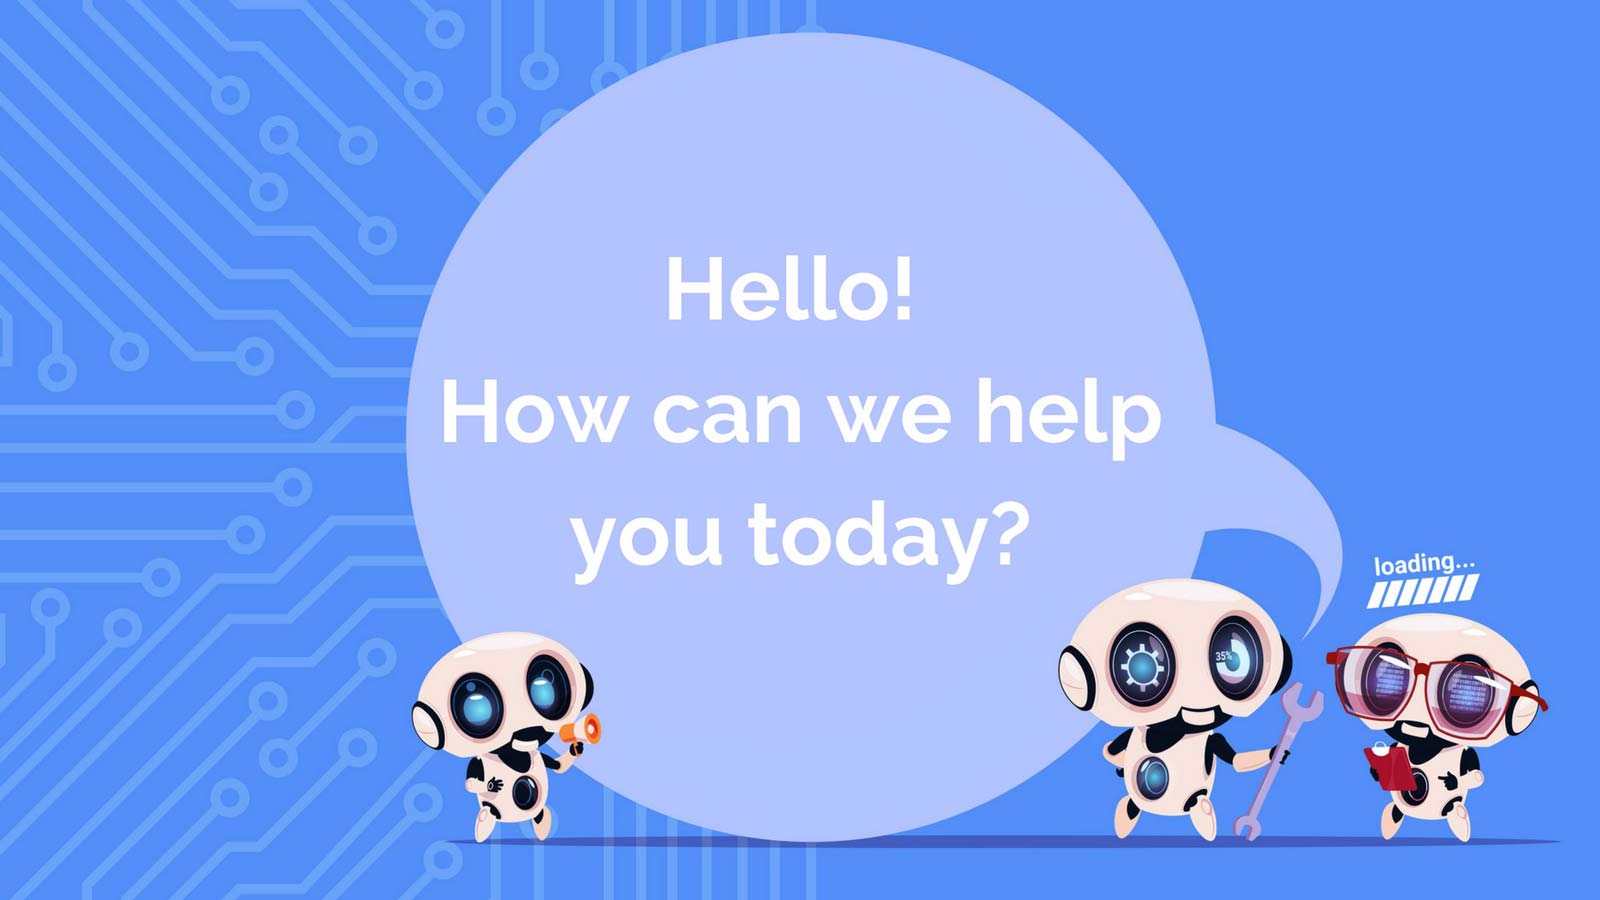 Artificial intelligence chatbot giving an automated customer service response